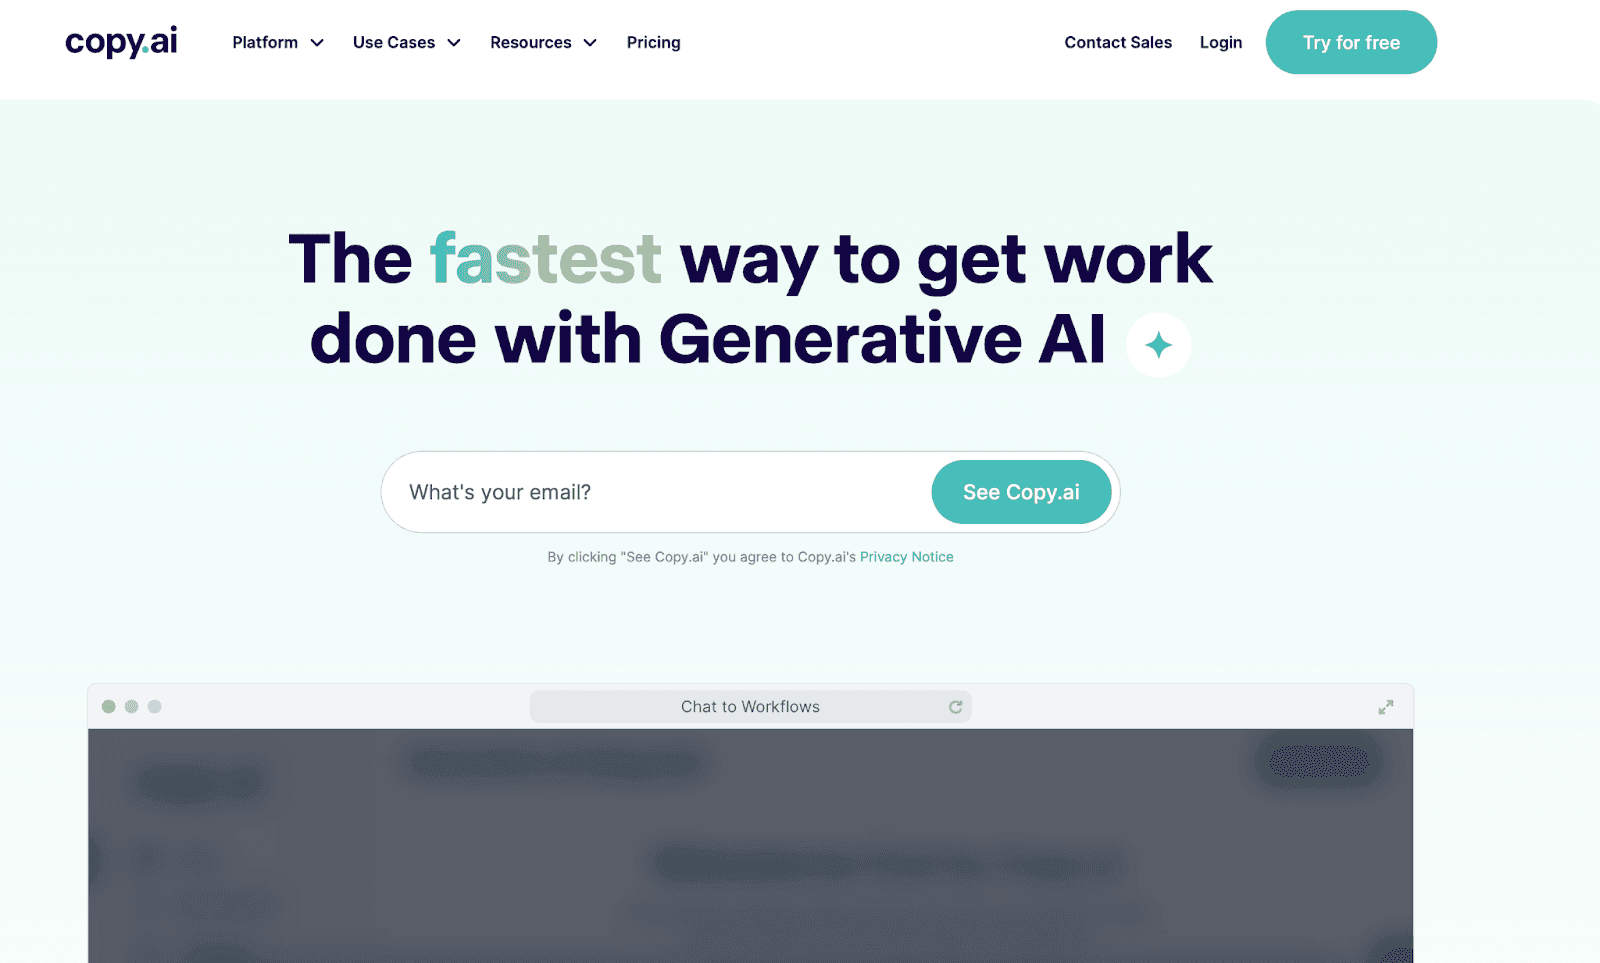 The fastest way to get work done with generative AI